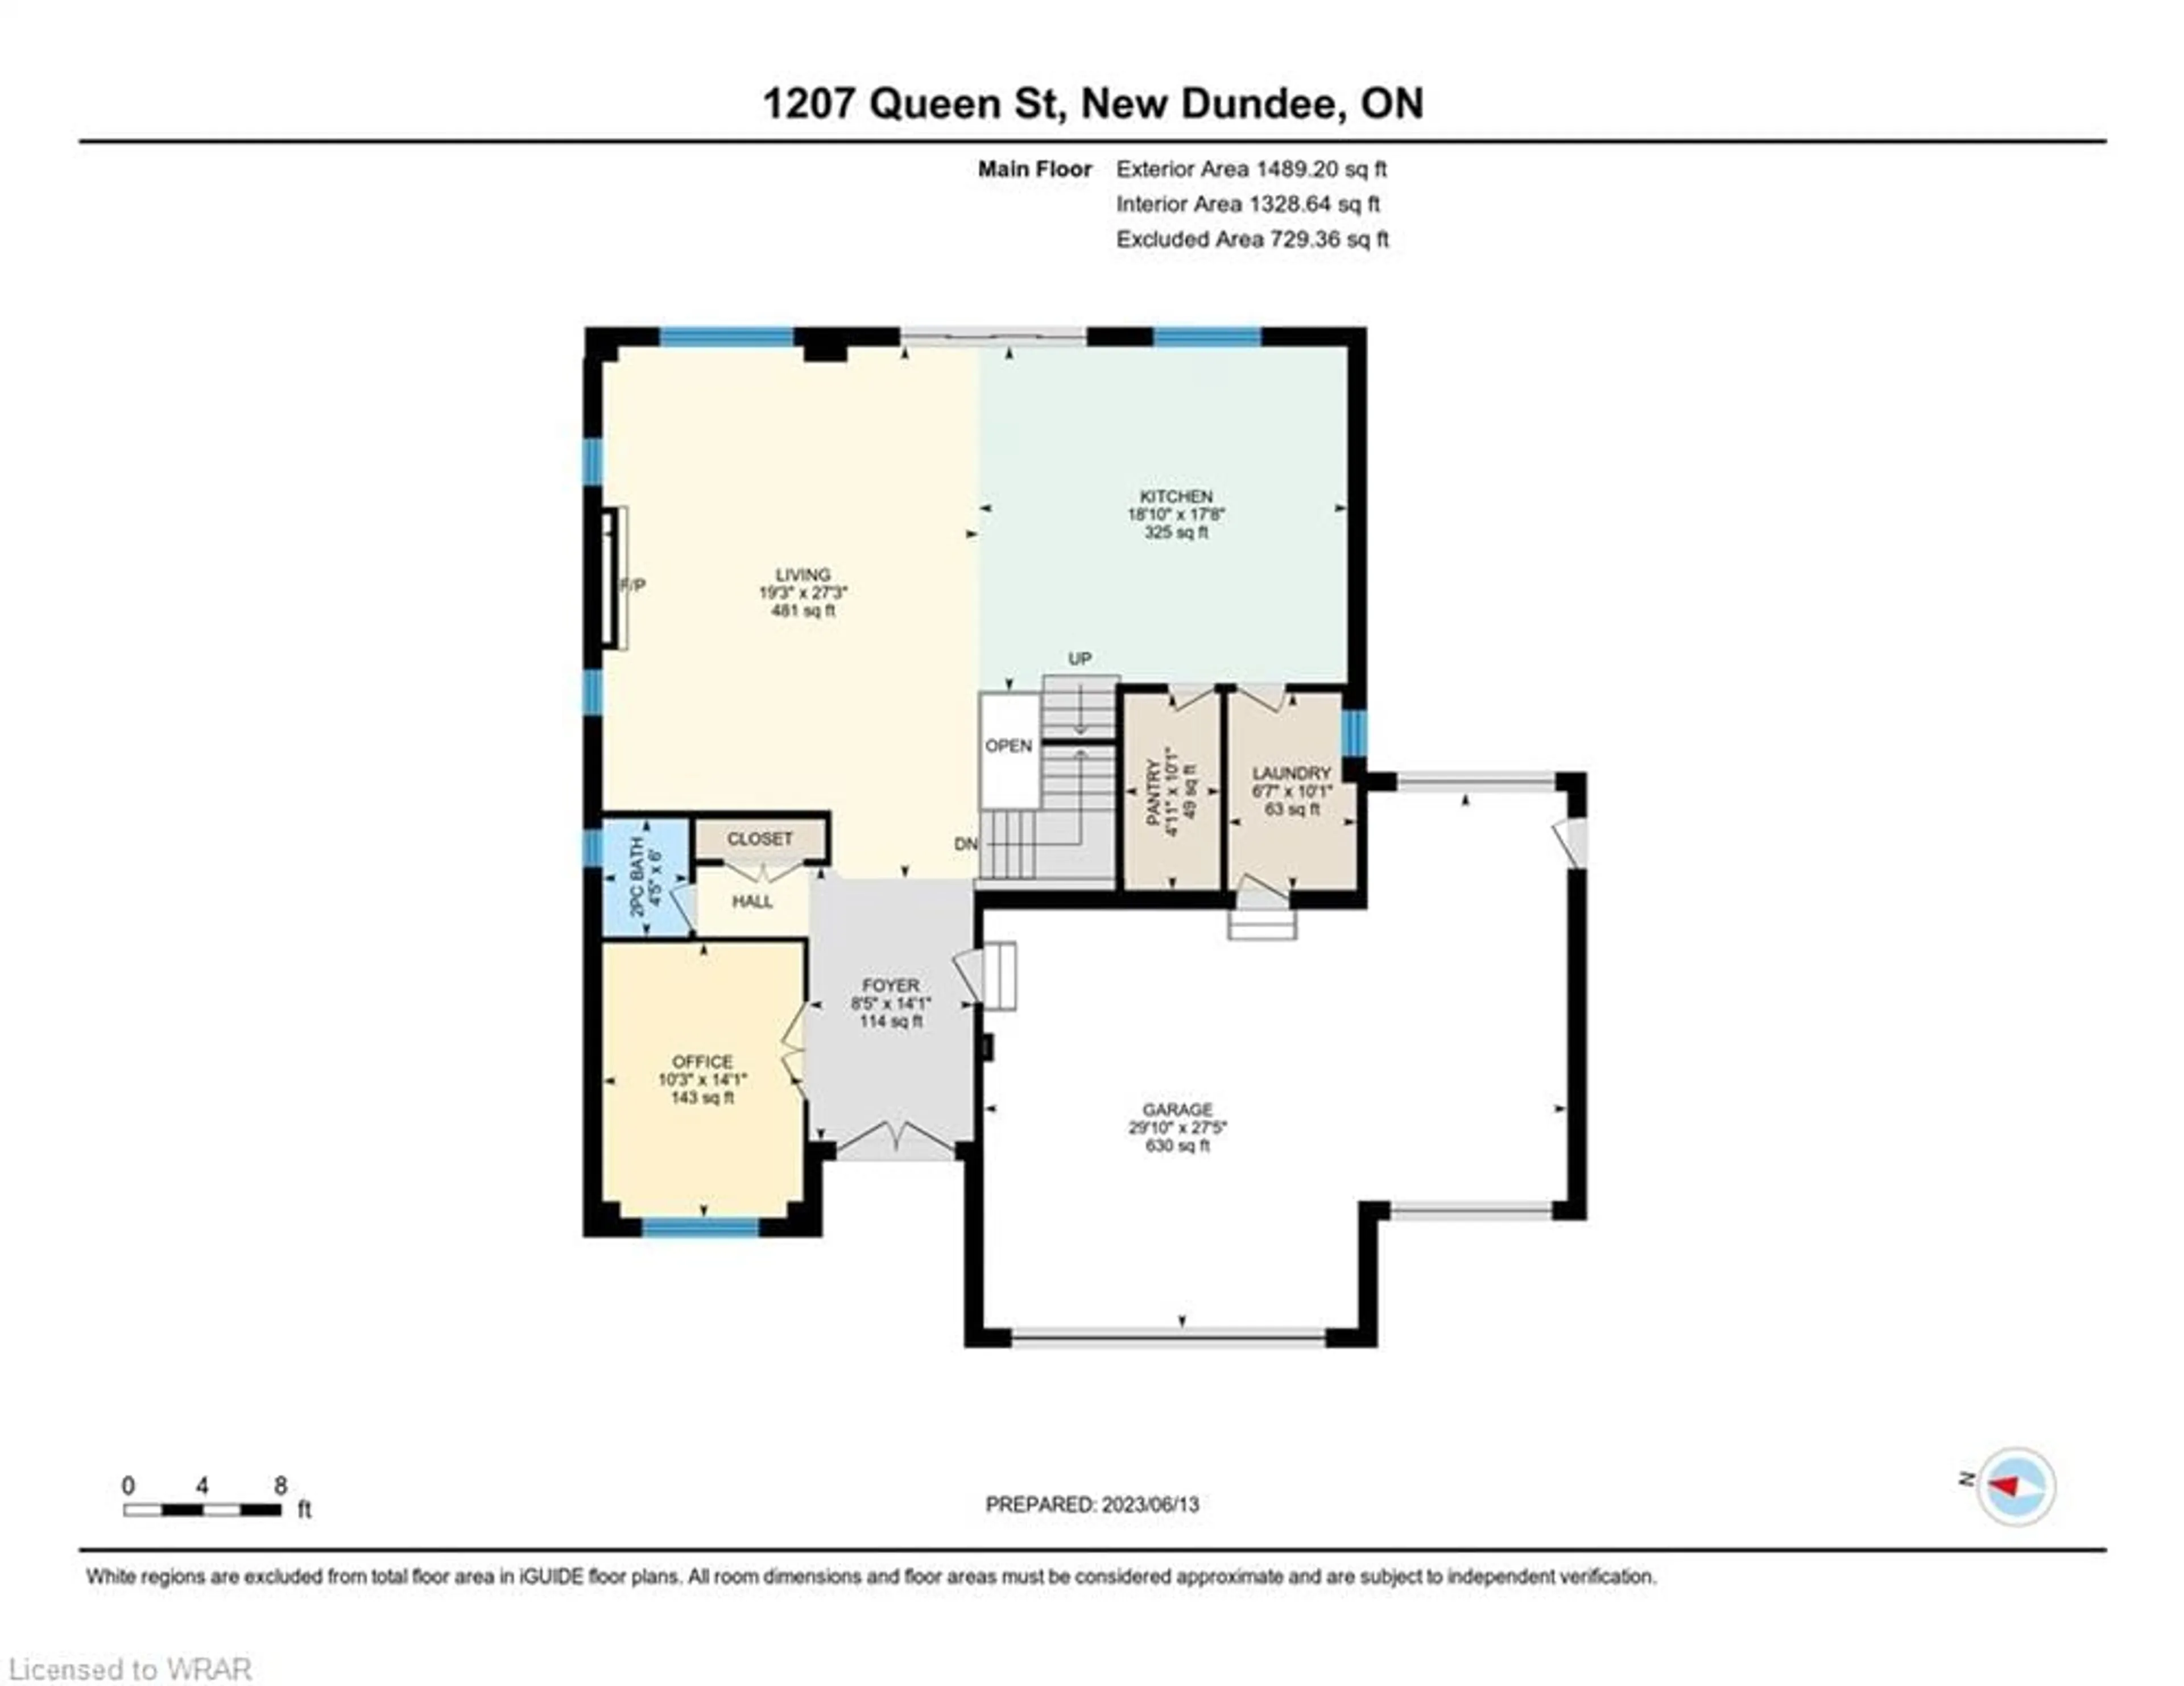 Floor plan for 1207 Queen St, New Dundee Ontario N3A 2N3